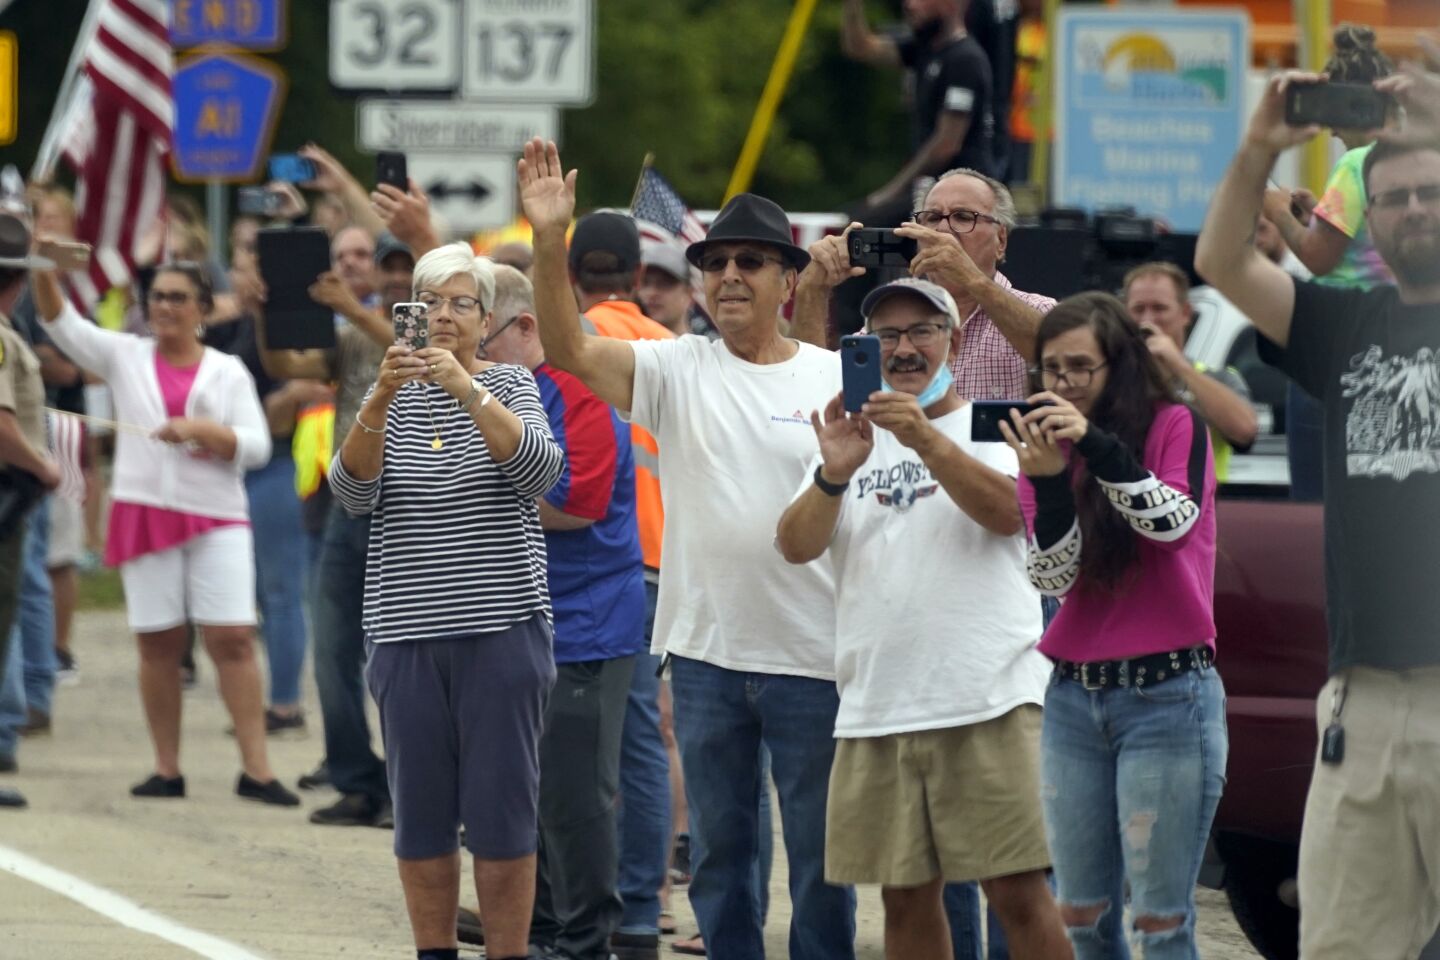 People without masks wave and take video and photos as President Trump's motorcade passes in Kenosha, Wis.